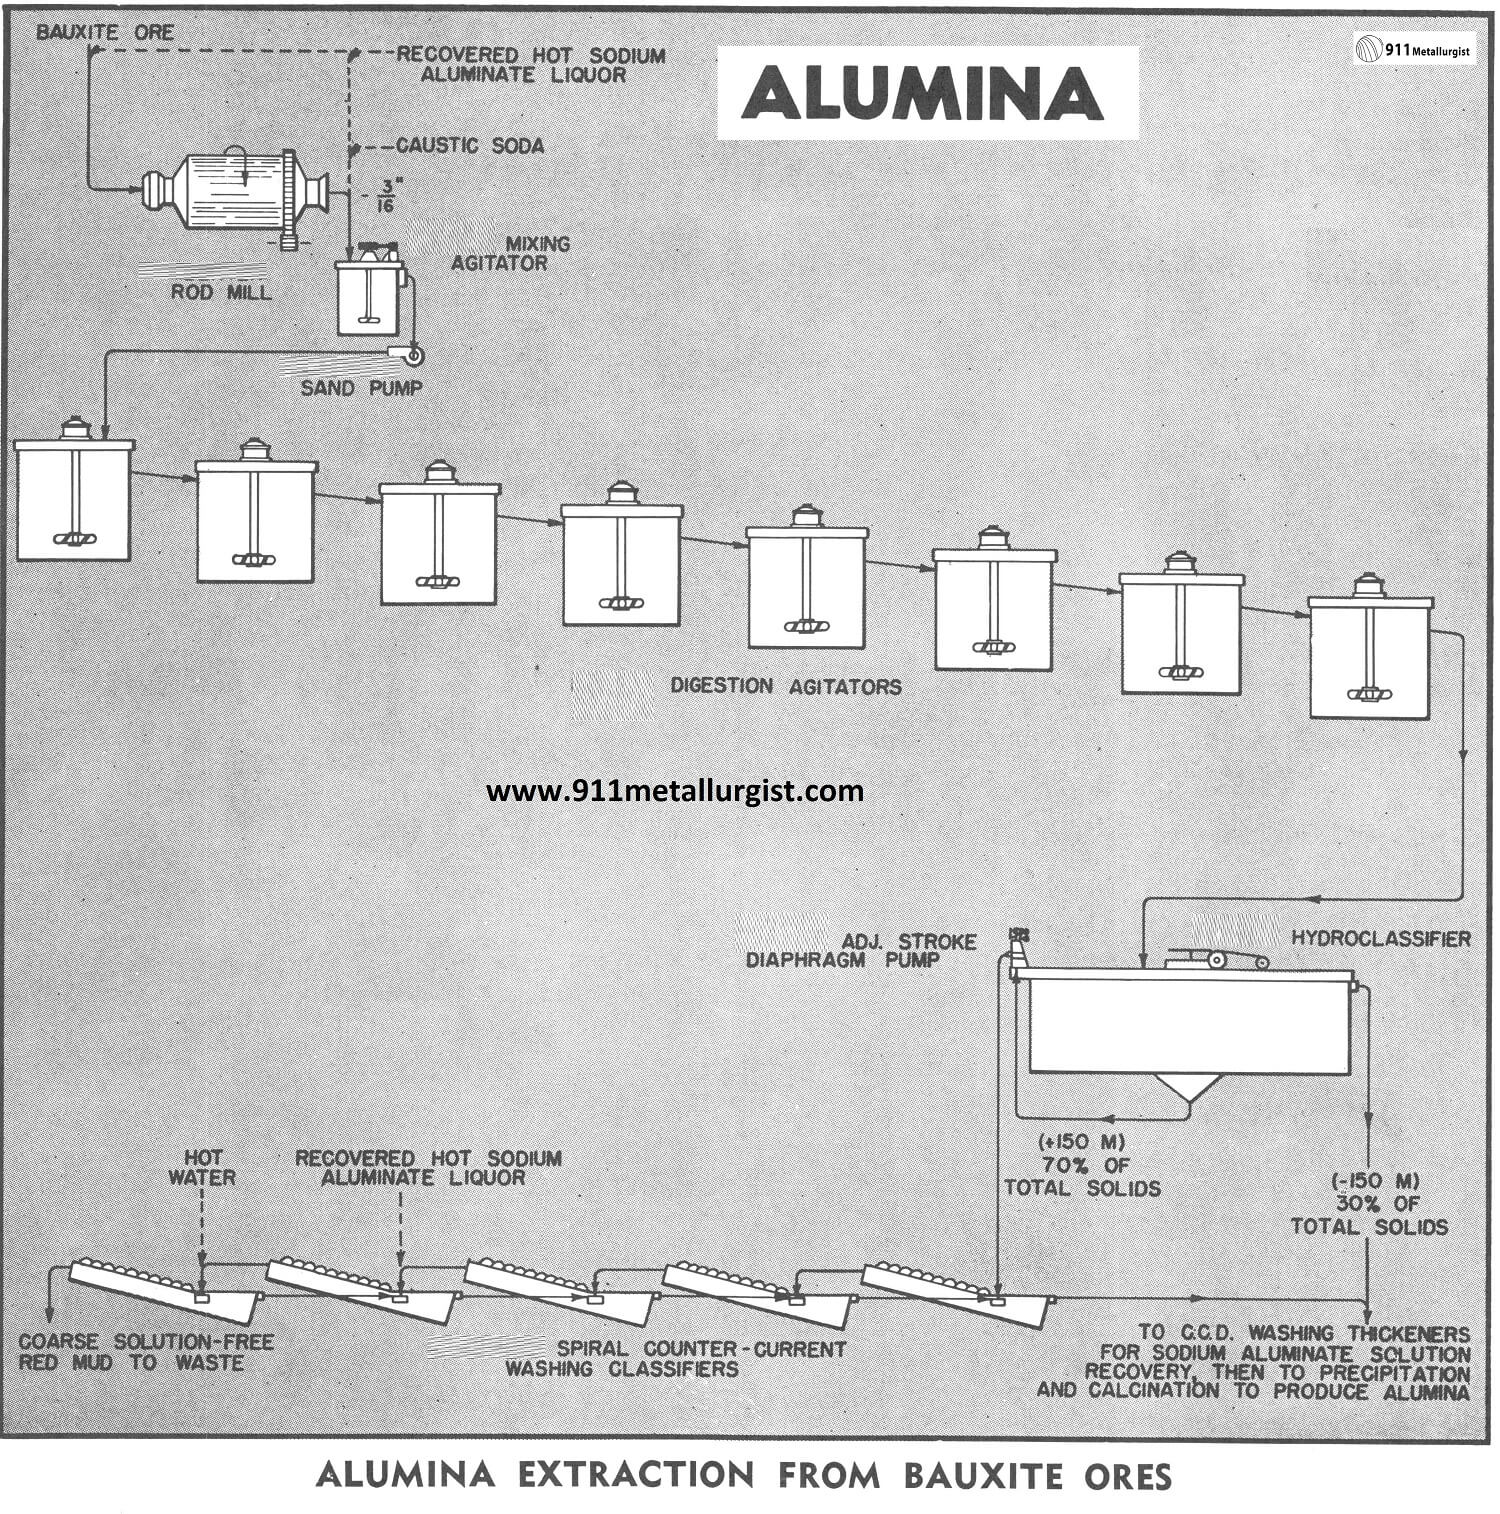 Alumina Extraction from Bauxite Ores